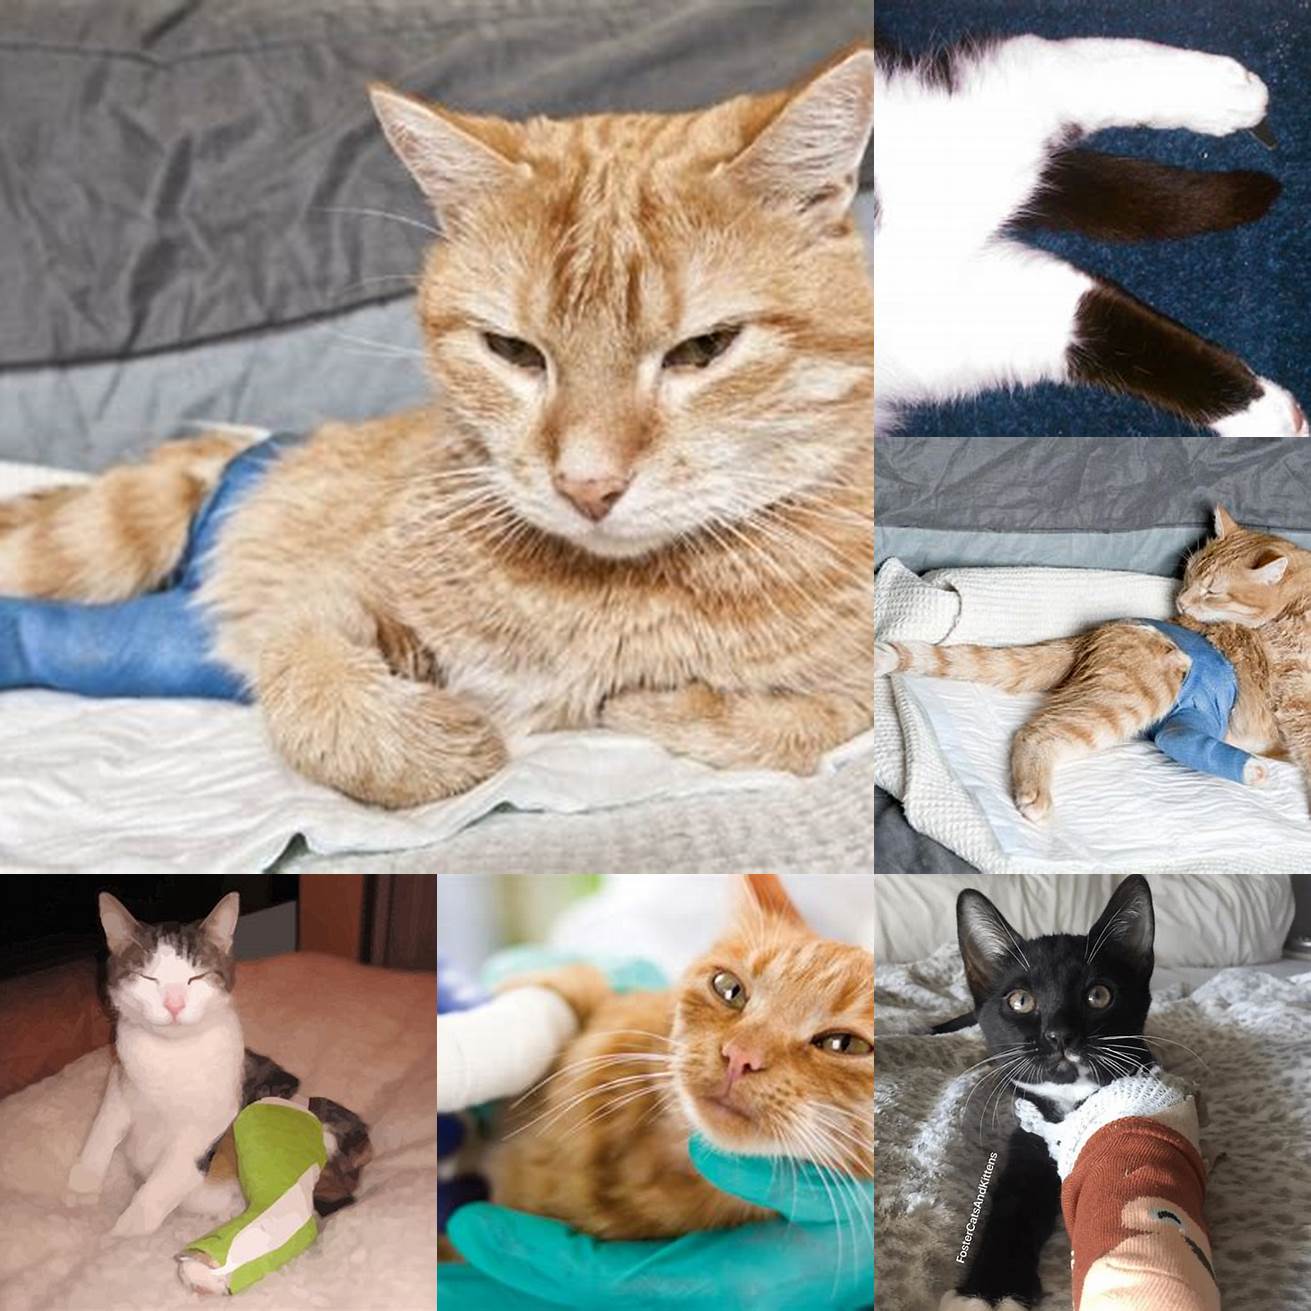 Broken bones - Cats can suffer from broken bones especially in their legs and hips when they fall from a height